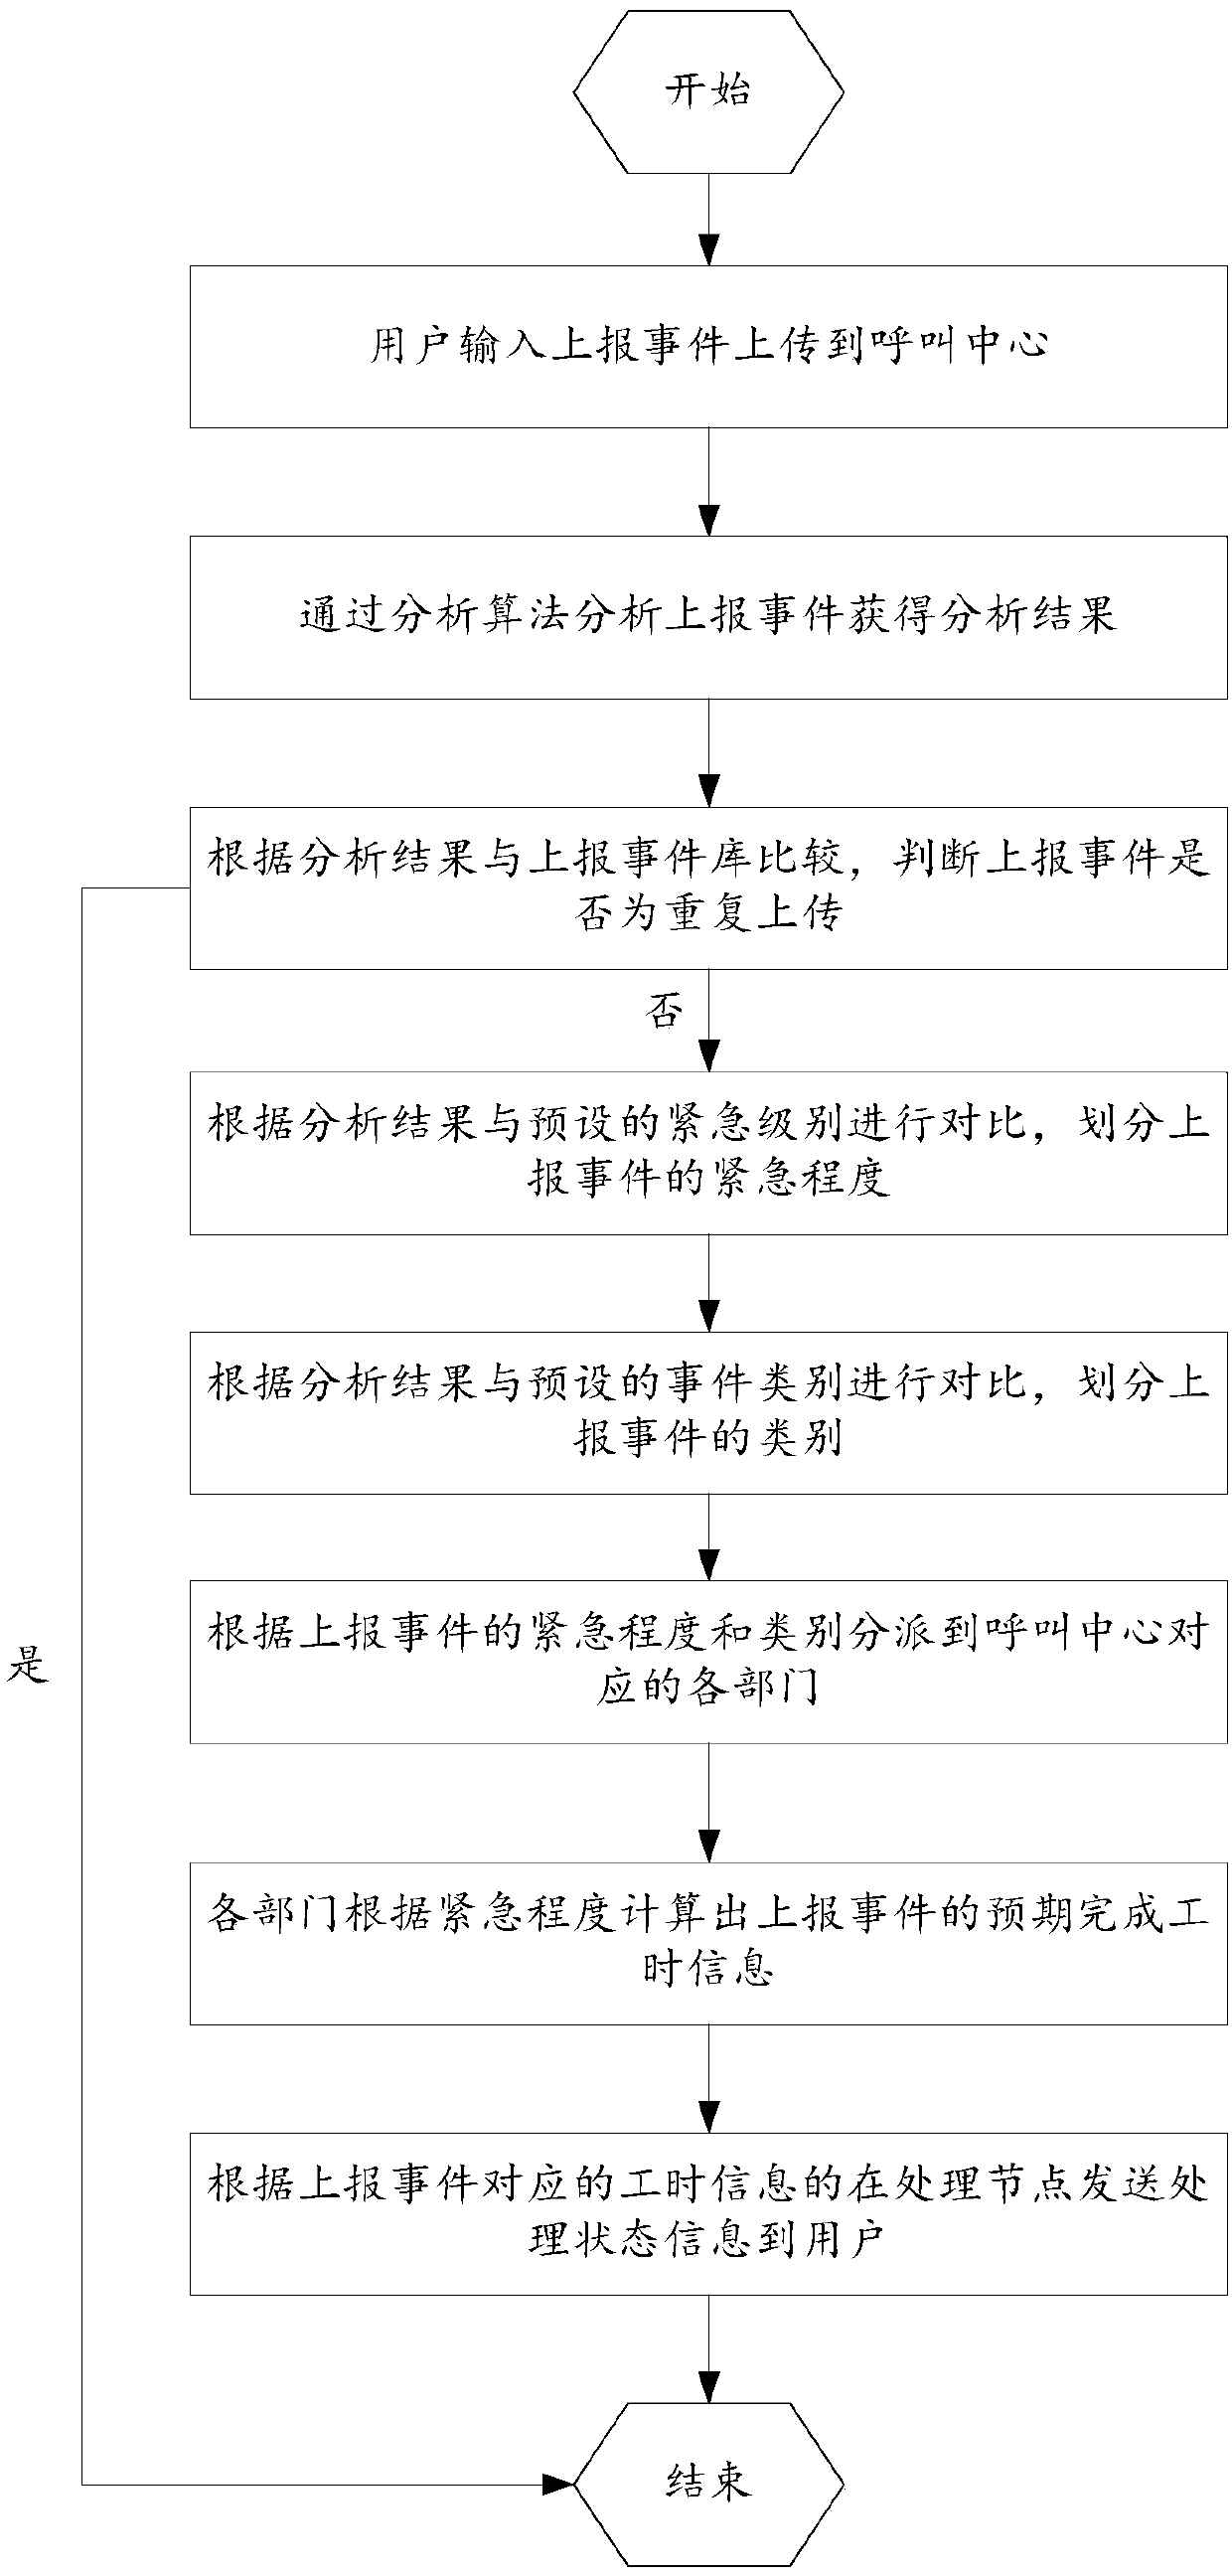 Event processing method and system